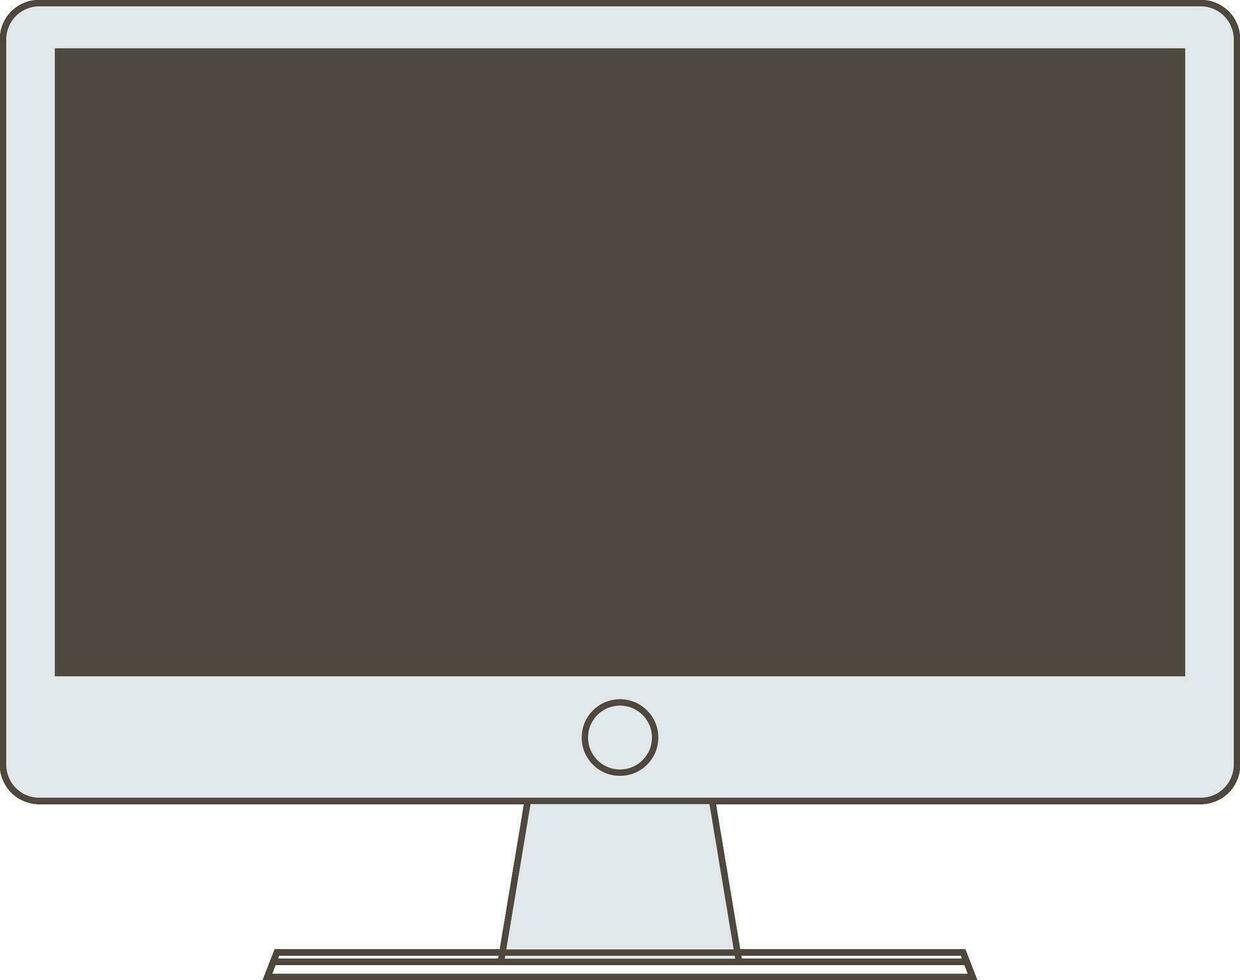 Flat style icon of a monitor. vector